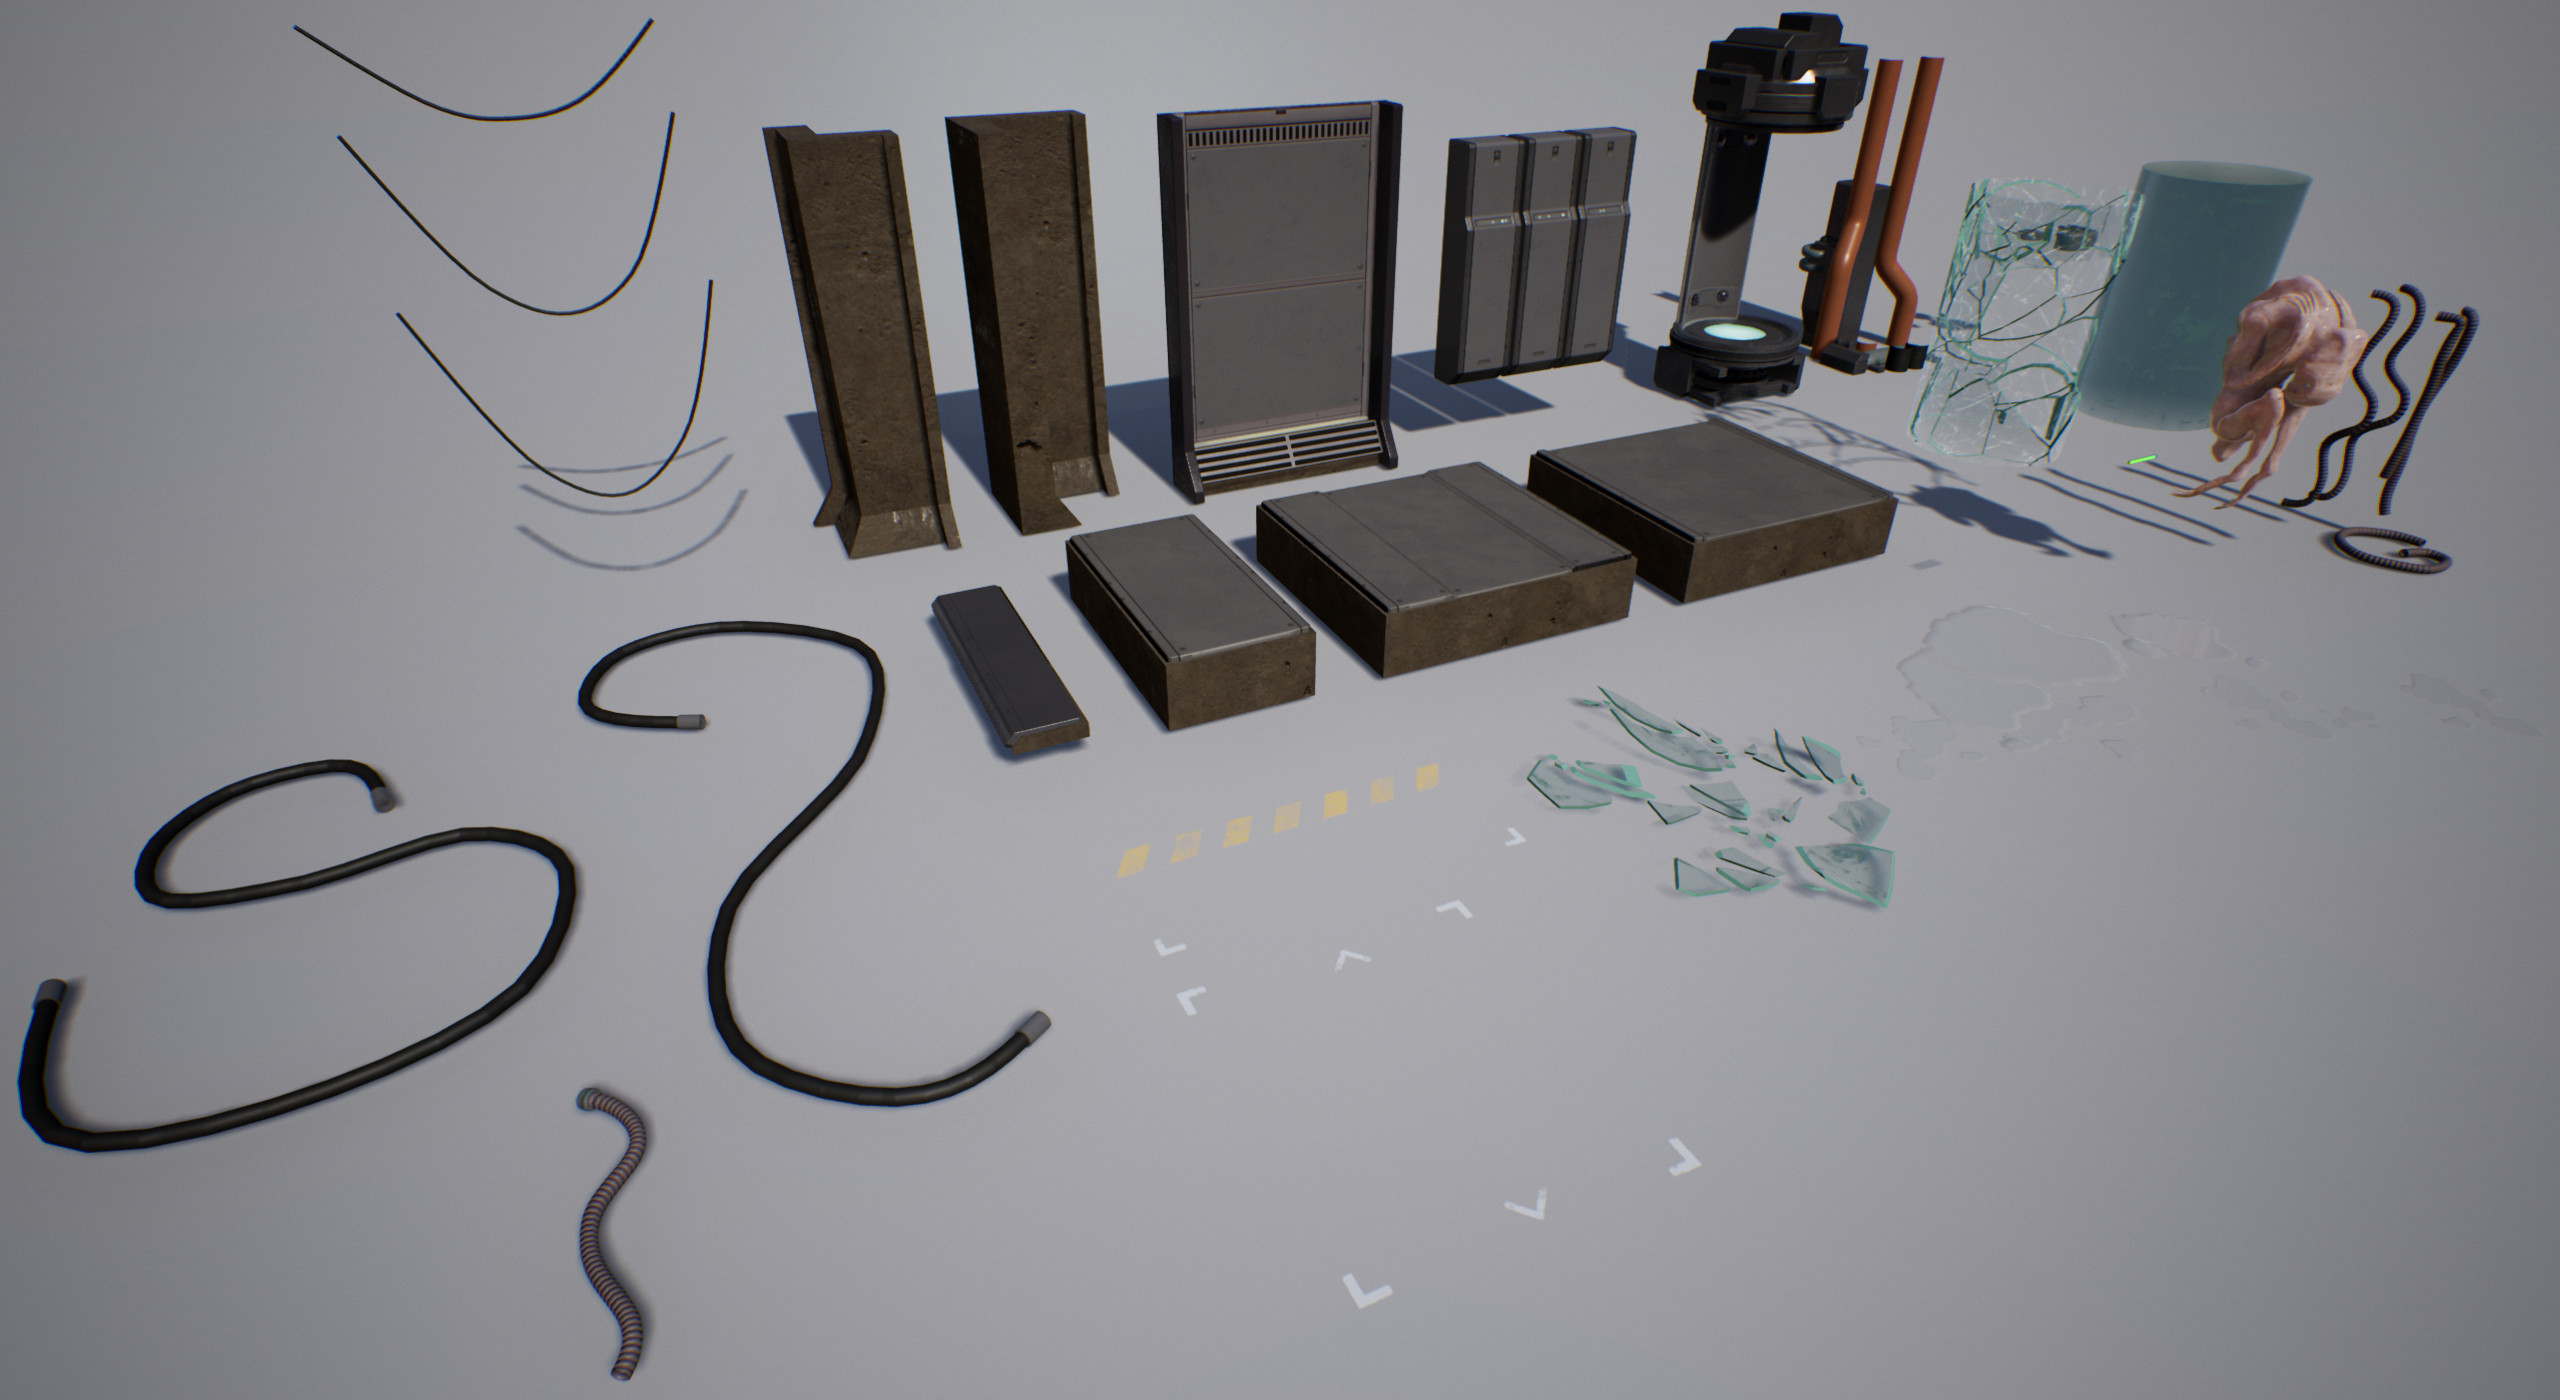 Assets created for scene